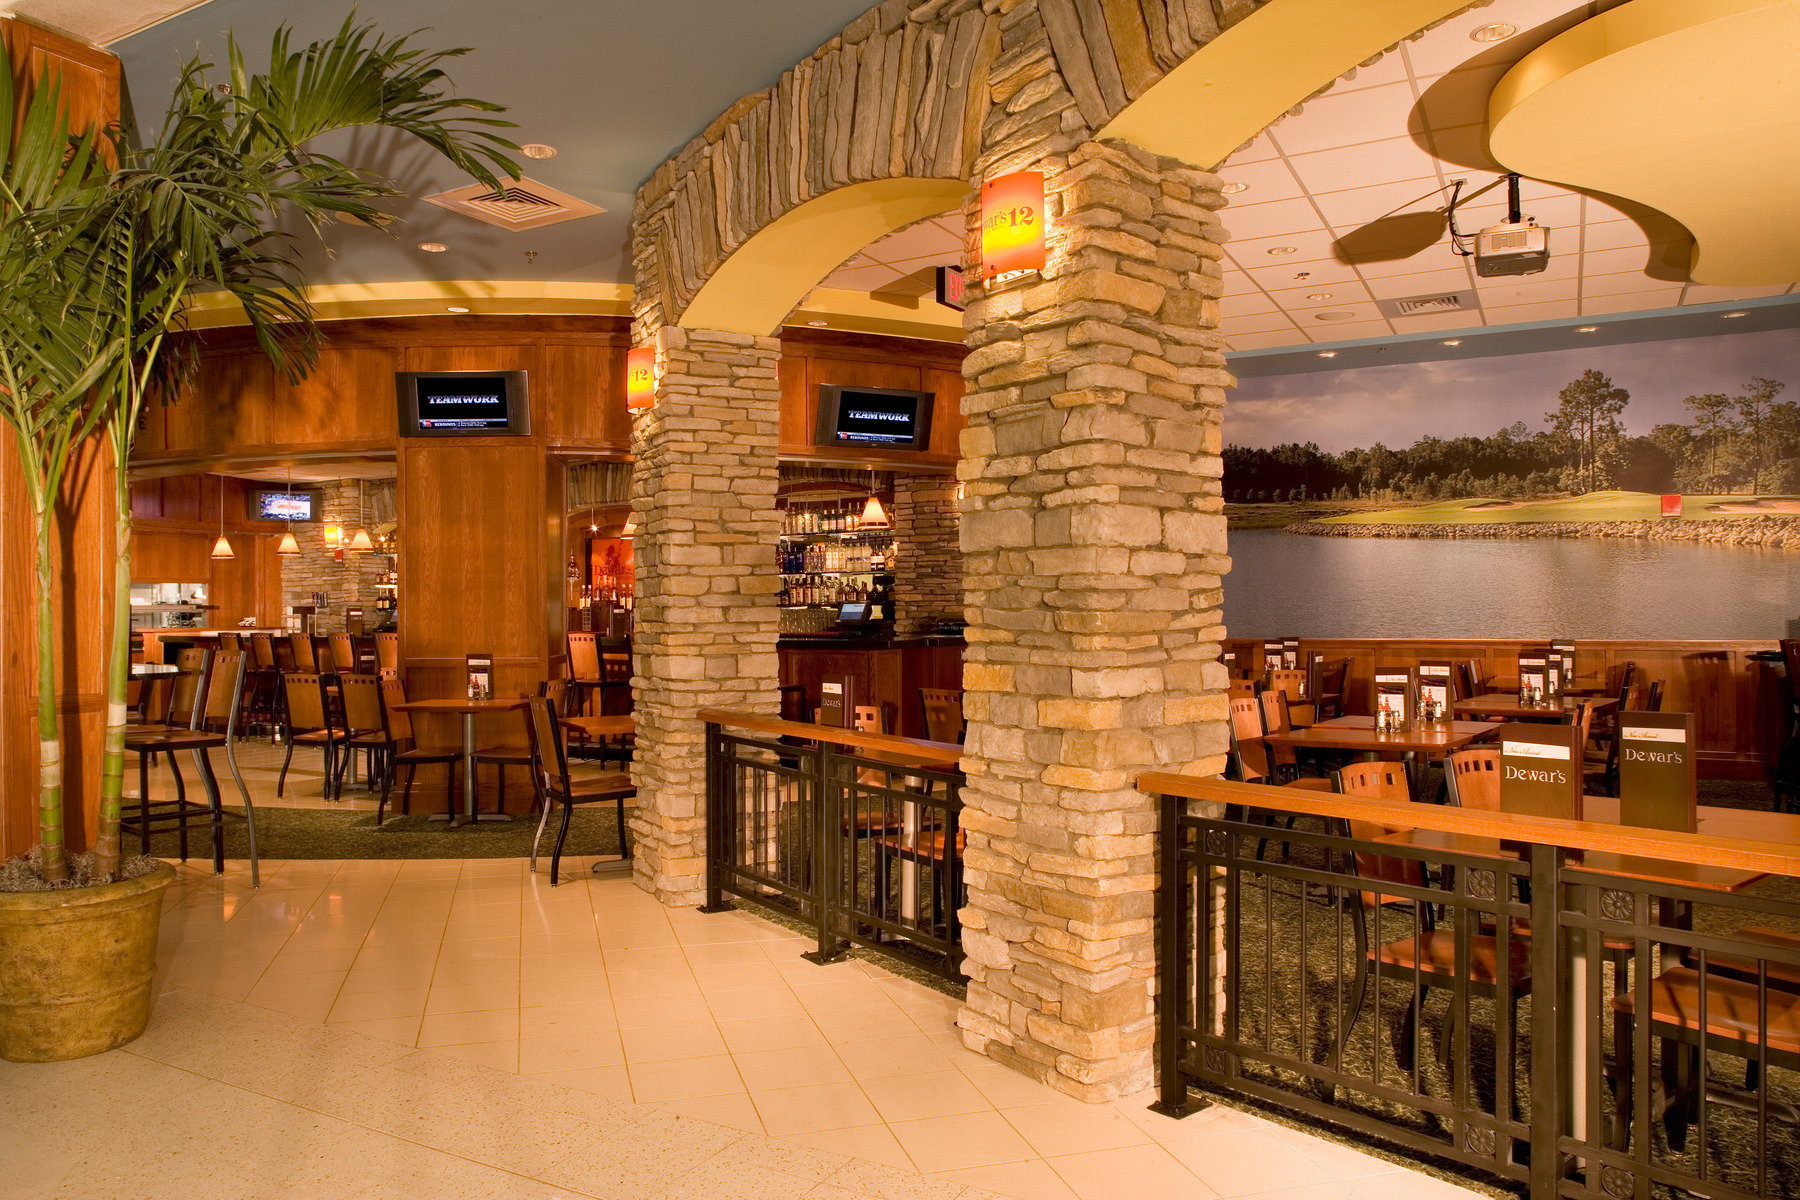 Photo of Dewar’s Clubhouse Bar and Grille, Fort Myers, FL